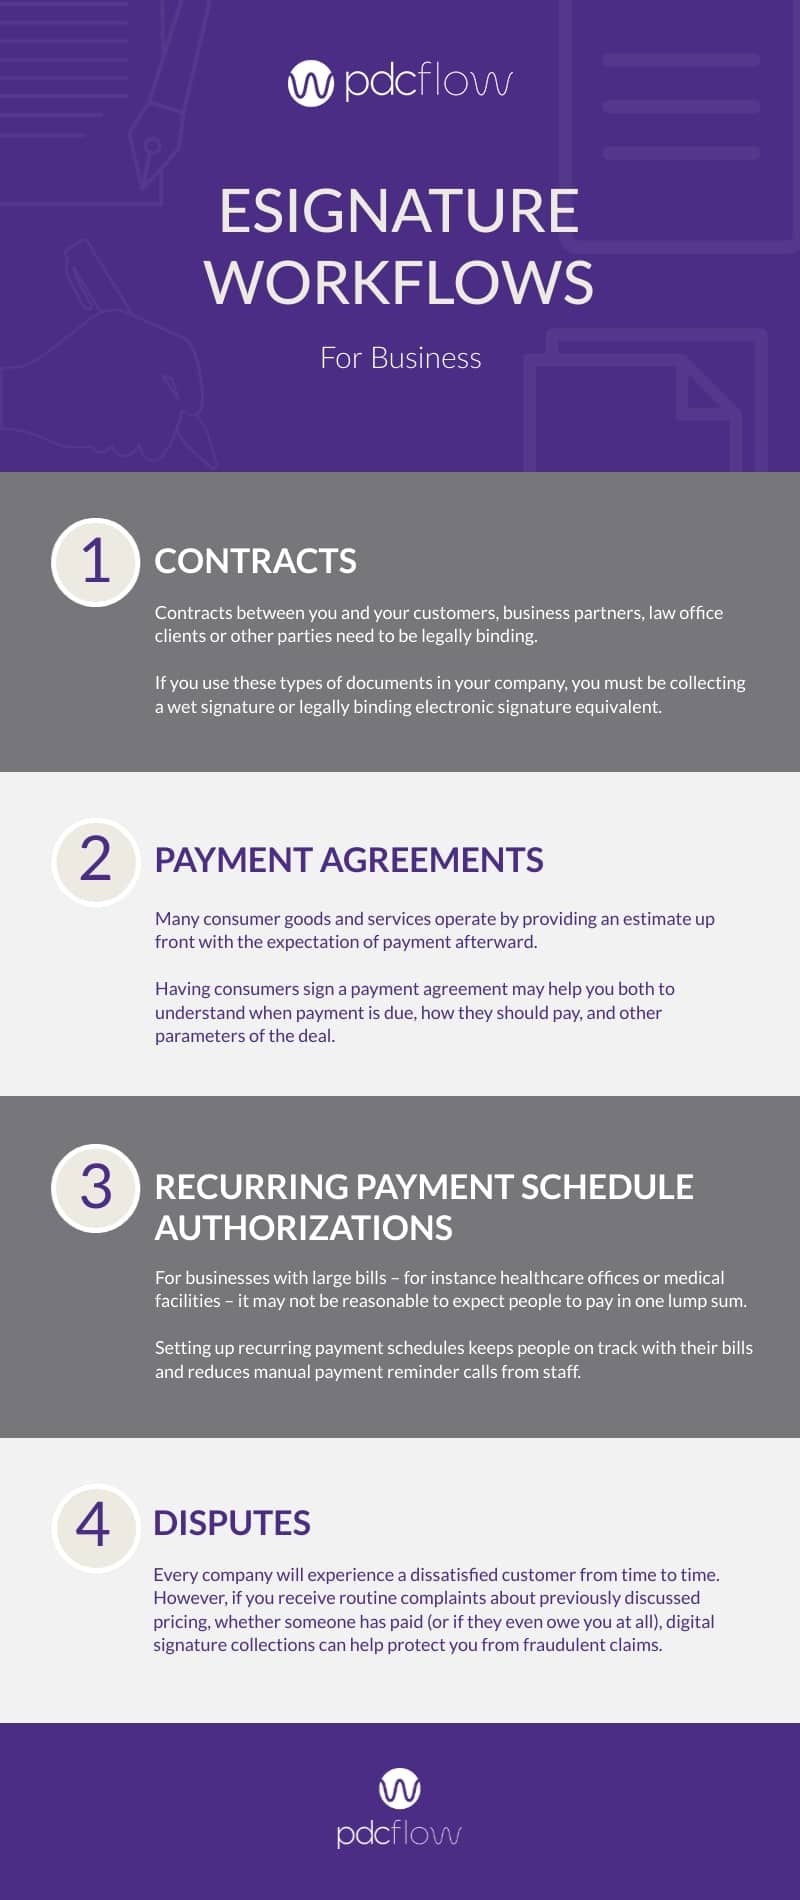 eSignature Workflows for Business Infographic